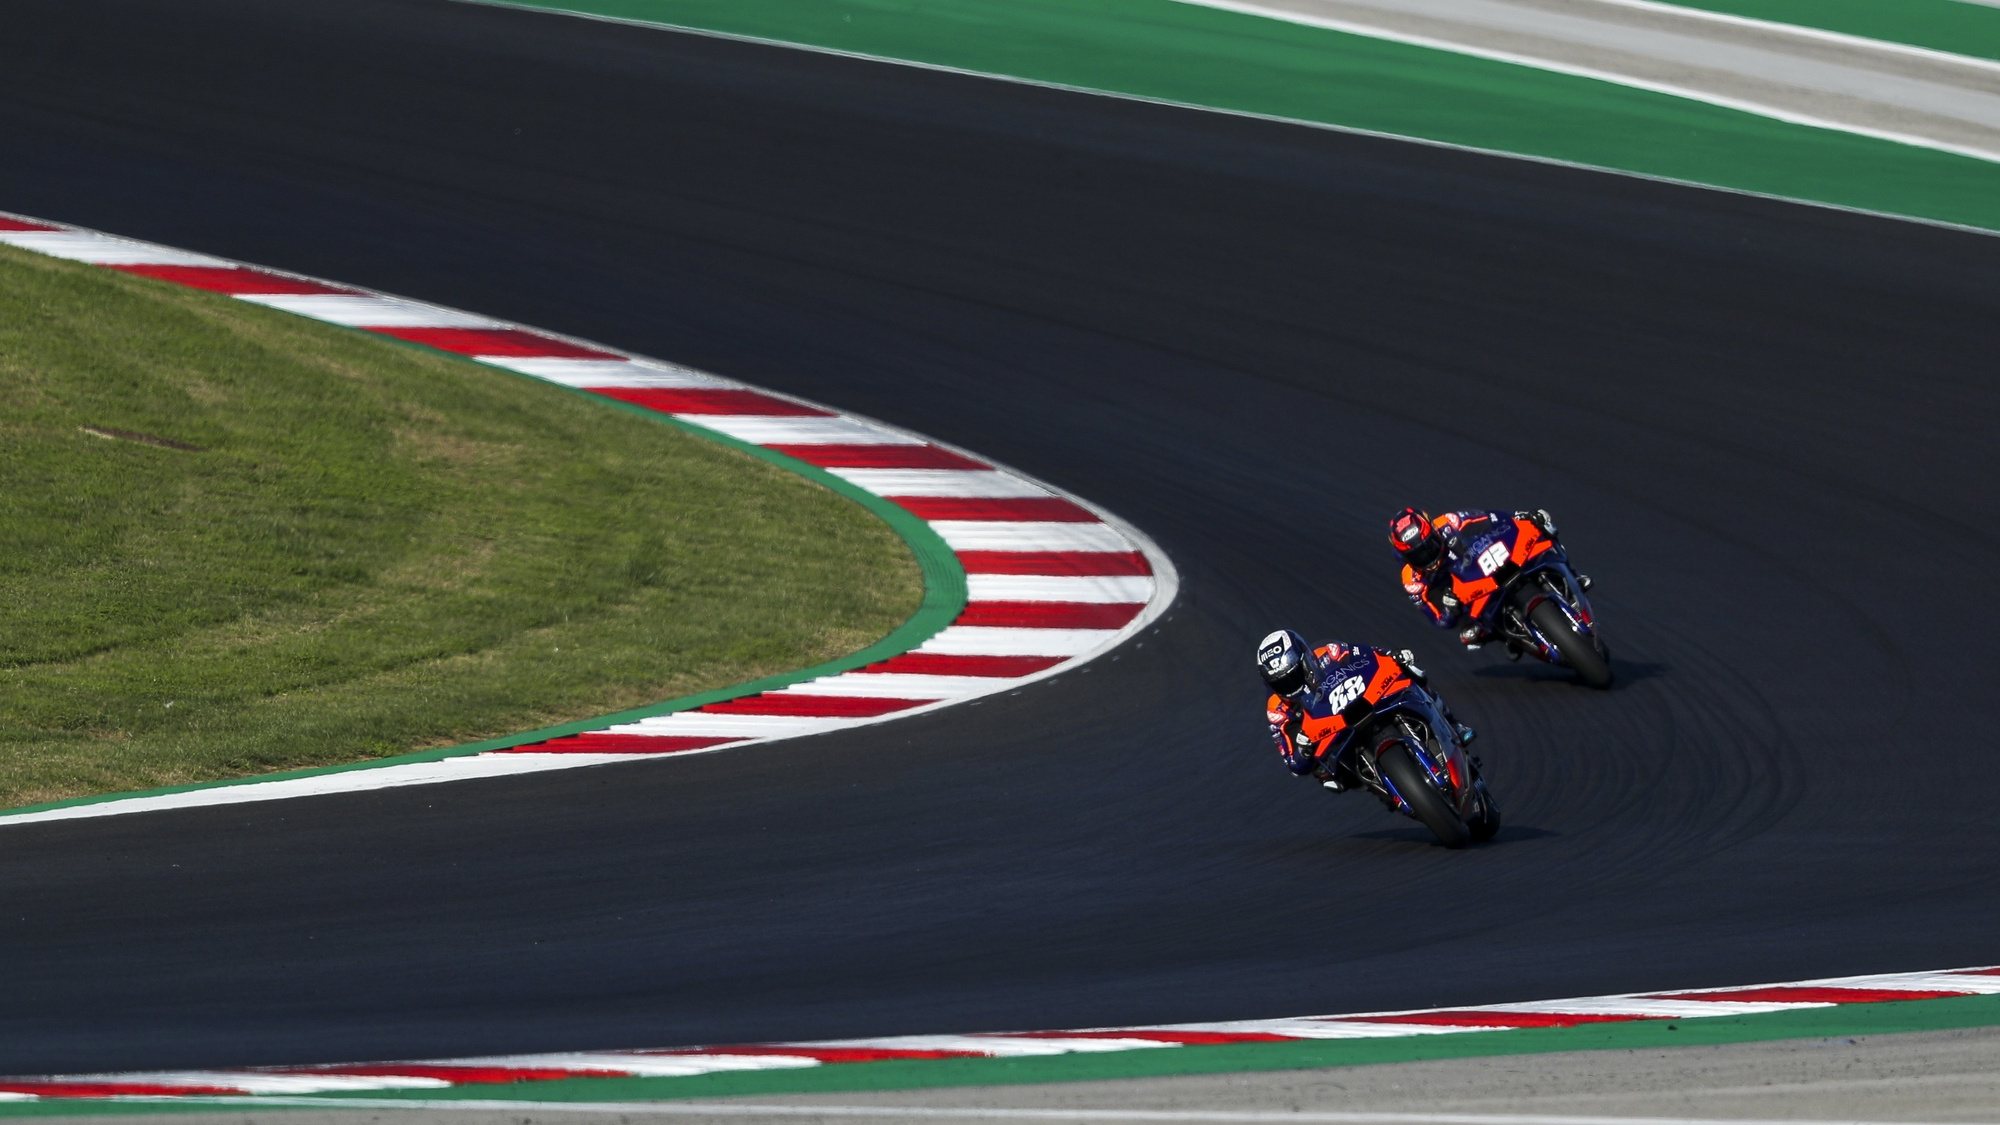 Portuguese rider Miguel Oliveira (L) and Finish rider Mika Kallio of KTM Tech3 Team during the second free training session of the Motorcycling Grand Prix of Portugal at Algarve International race track, south of Portugal, 20 November 2020. The Motorcycling Grand Prix of Portugal will take place on 22 November 2020. JOSE SENA GOULAO/LUSA